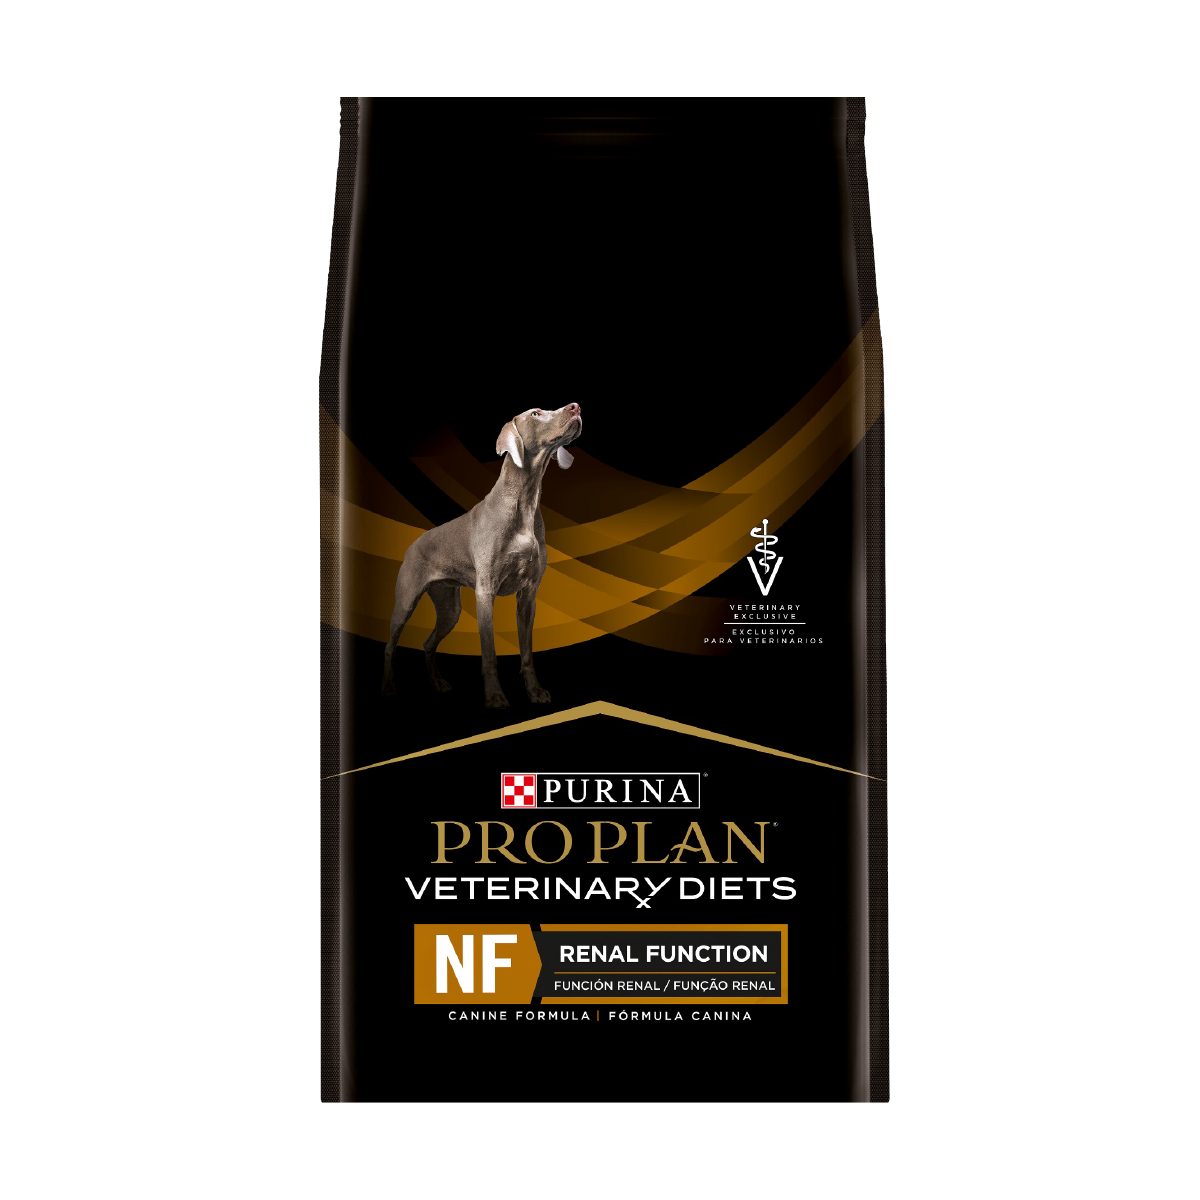 purina-pro-plan-veterinay-diets-dog-nf-renal-function.png